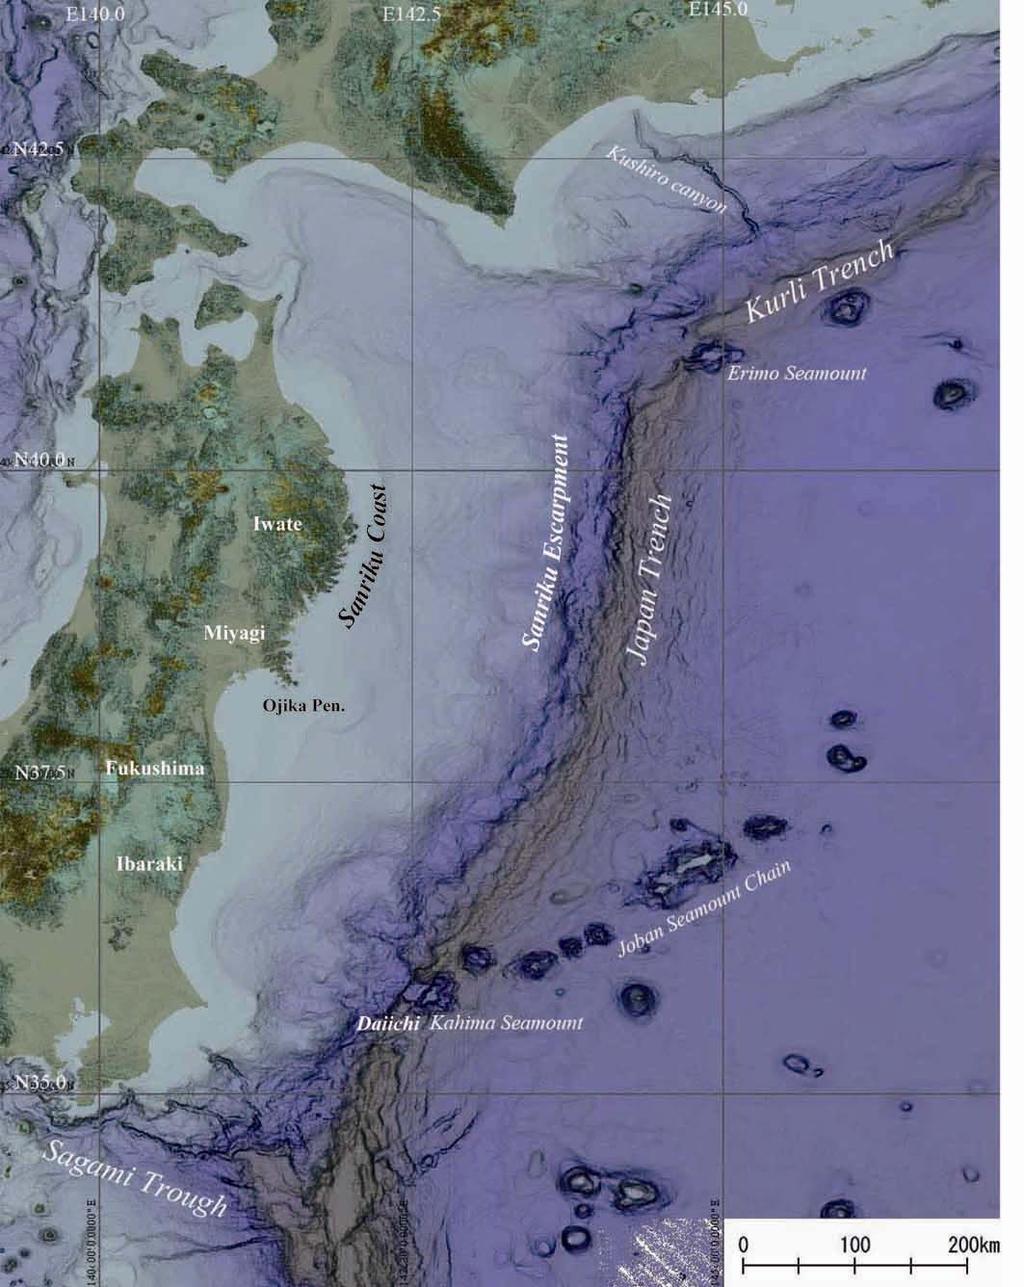 DEM in and around Japan (Kishimoto 2000) and SRTM3 data are also used to fill the data uncovered by narrow multi-beam bathymetric survey. Fig.